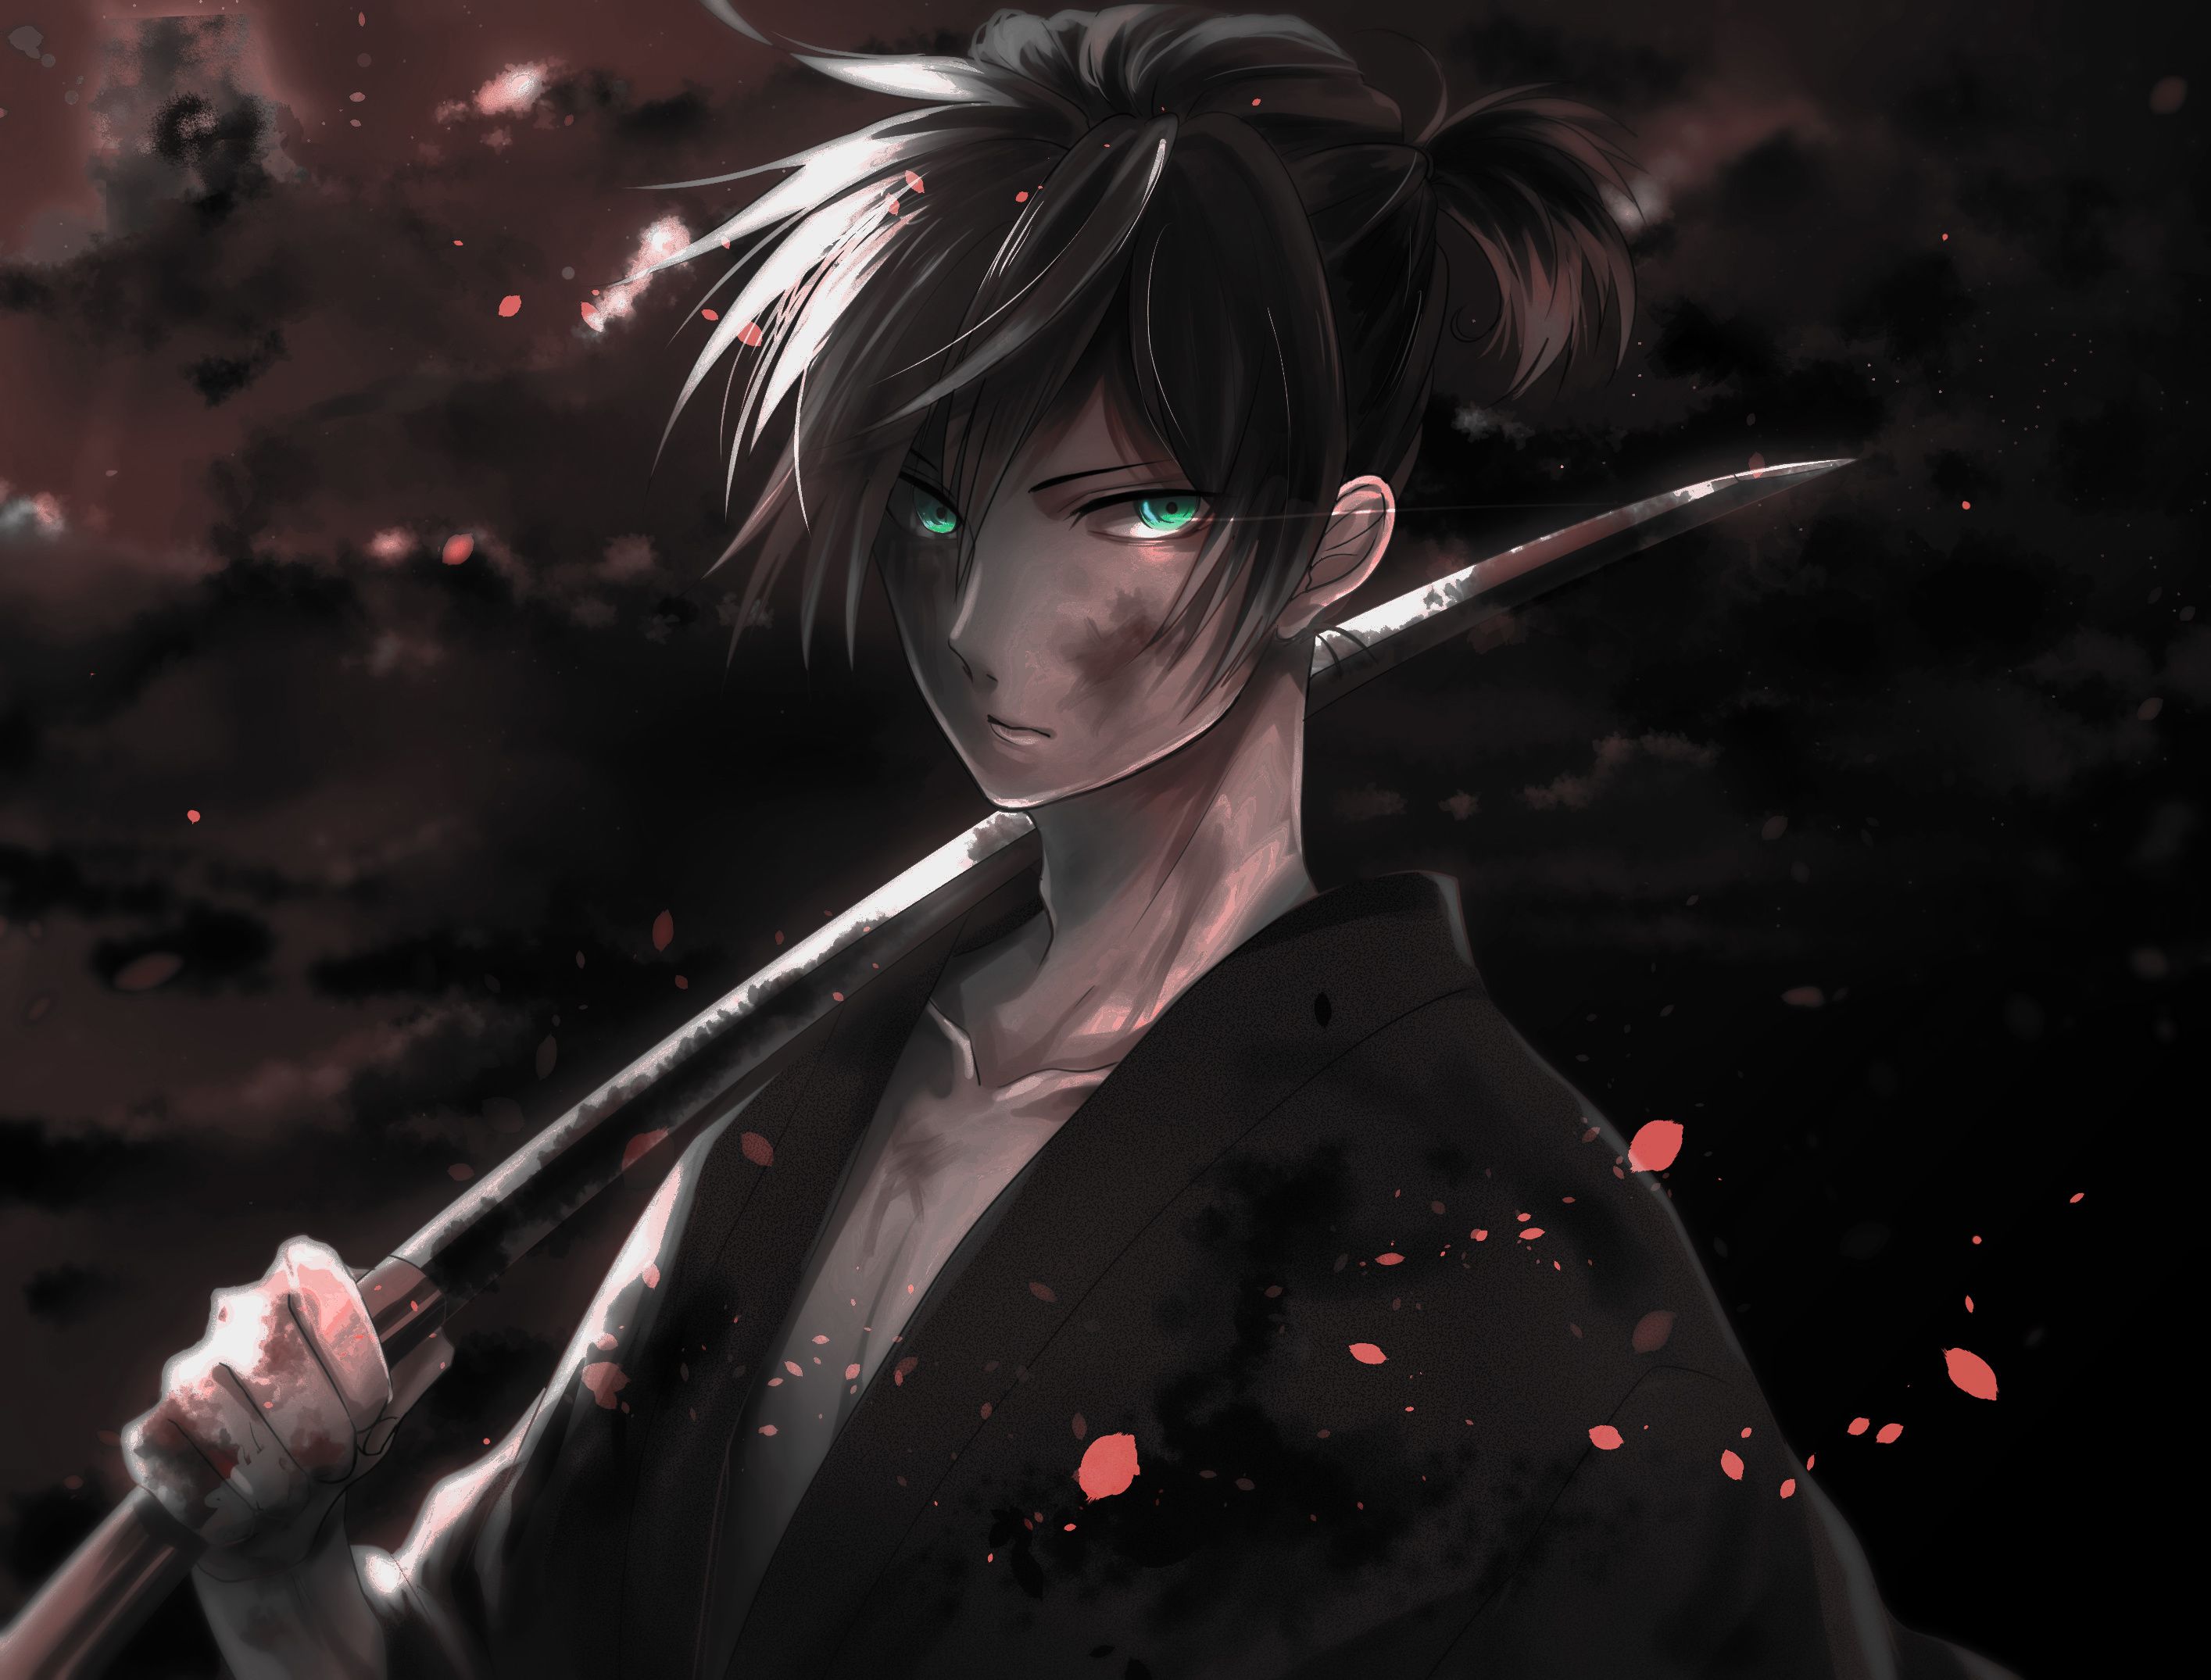 2. Yato from Noragami - wide 3